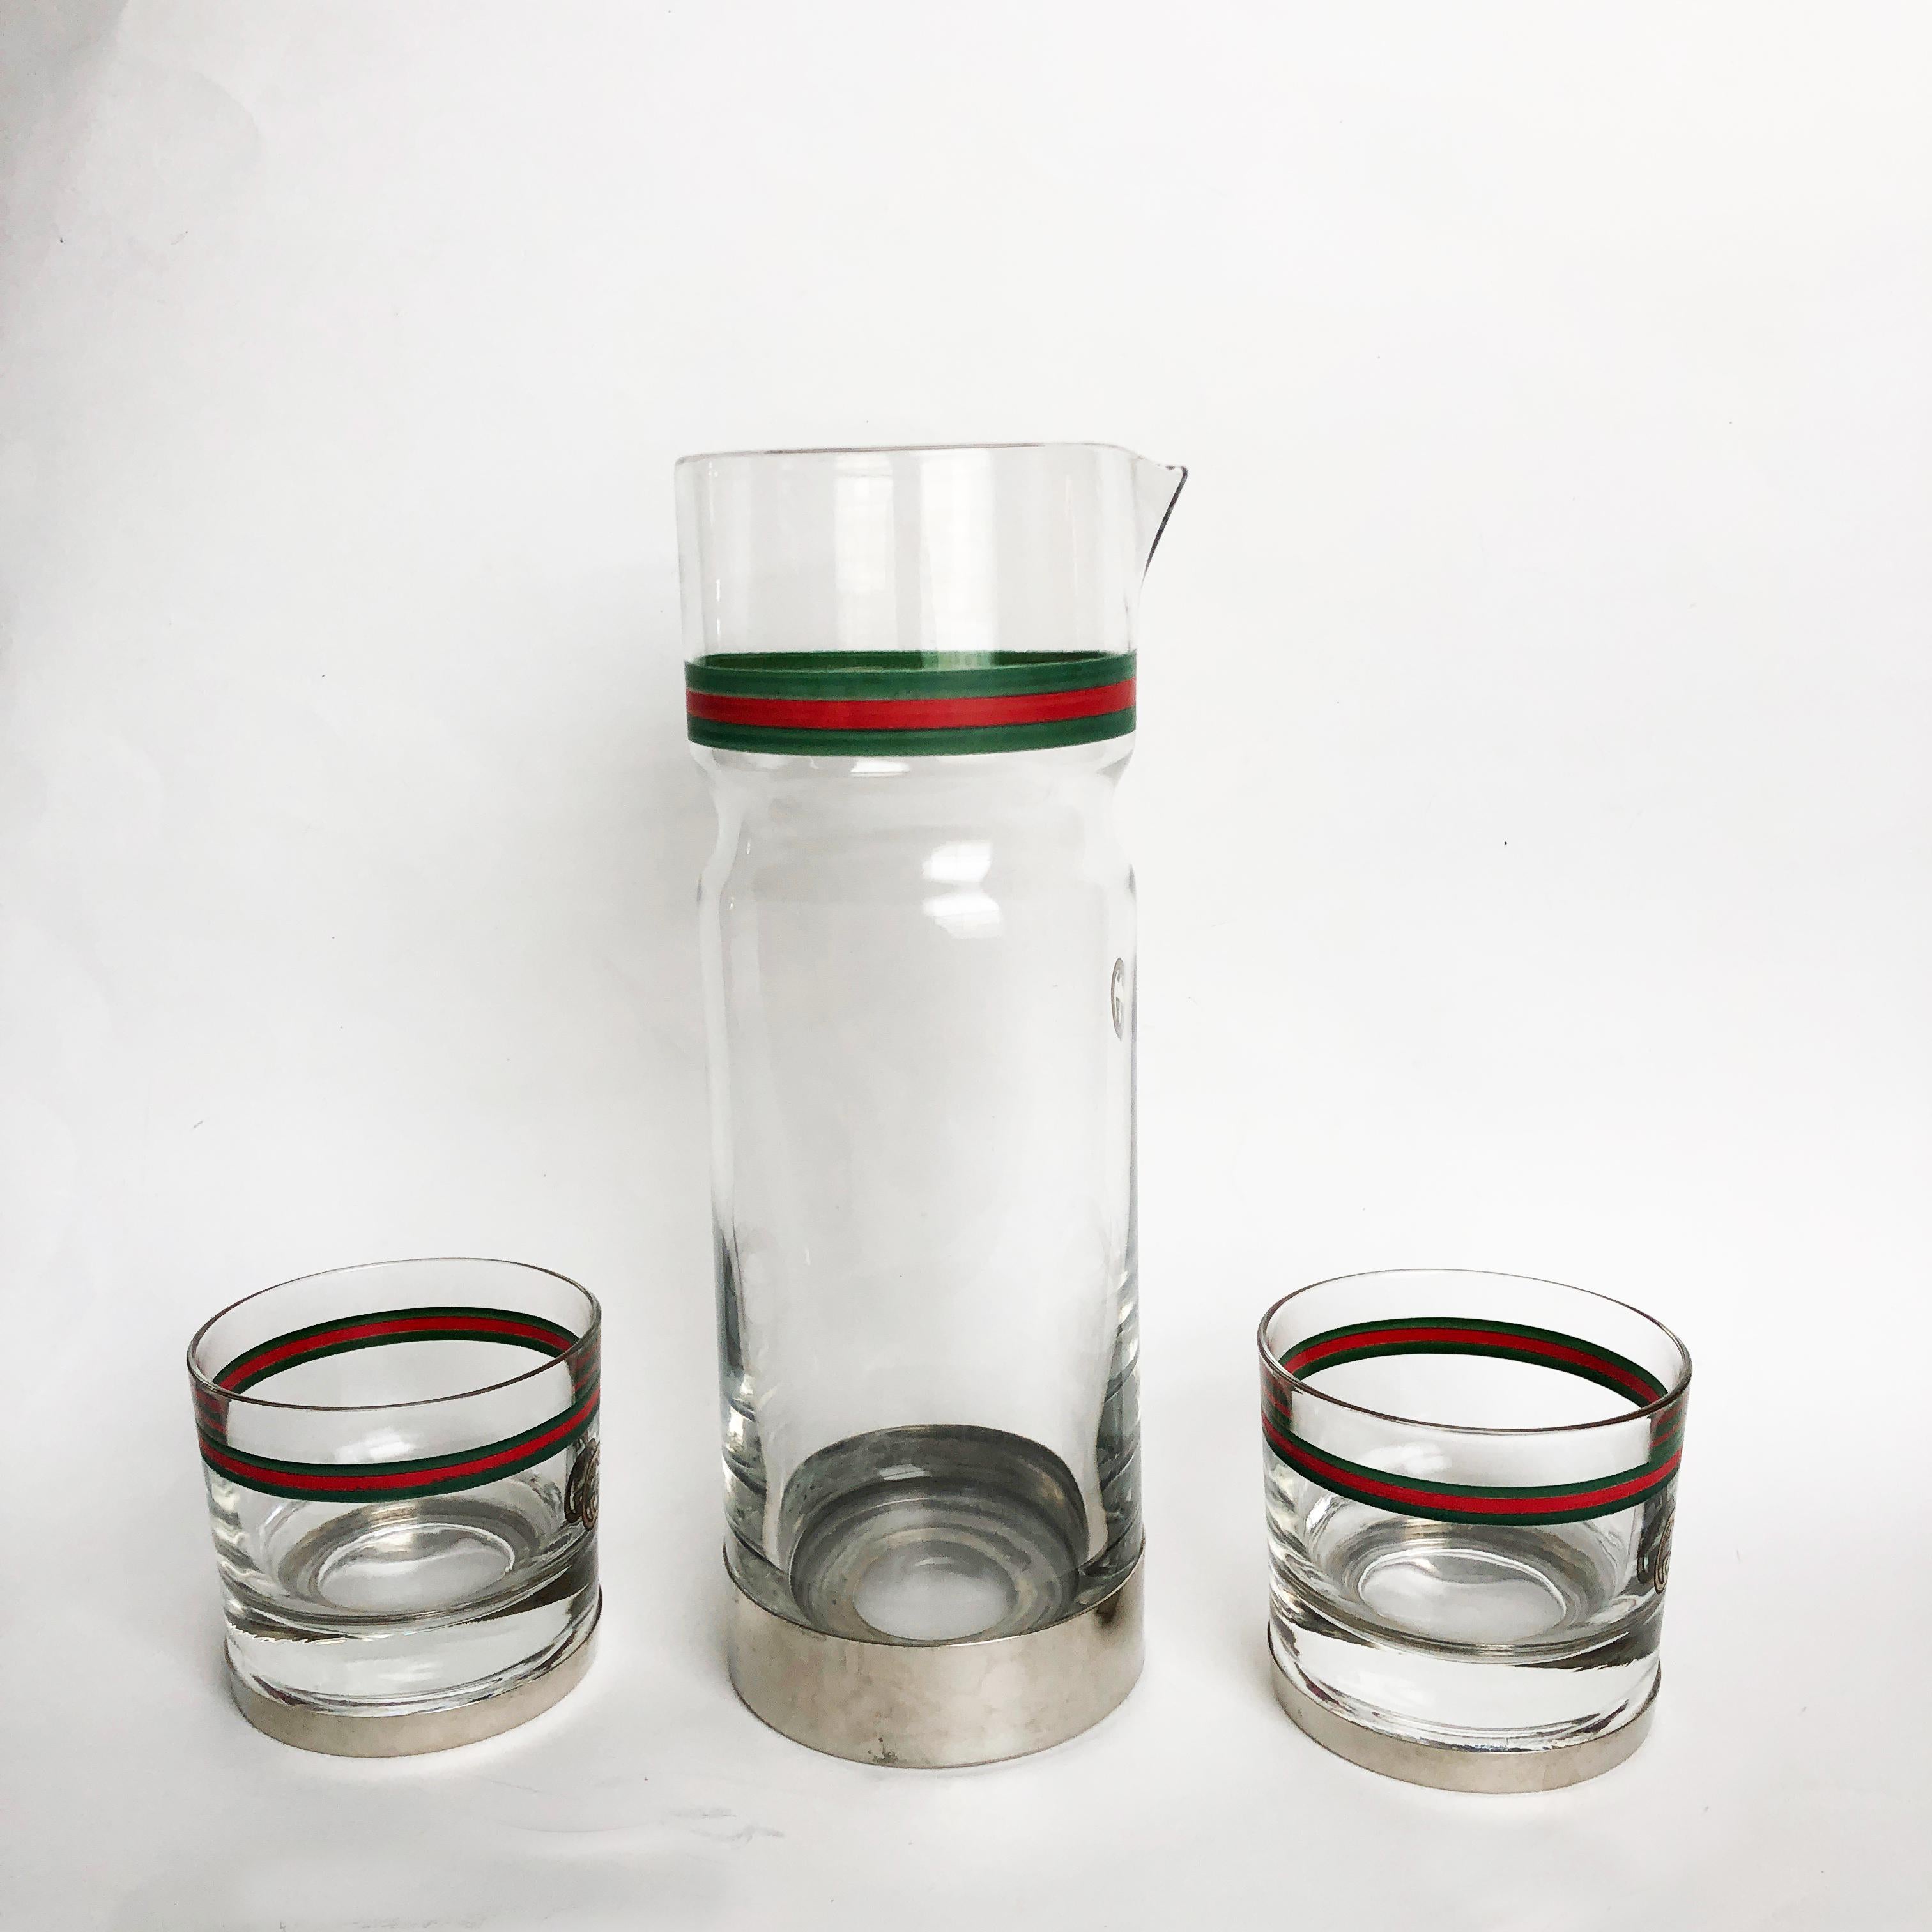 Entertain in style! Authentic, preowned, vintage Gucci 3pc barware set: GG Logo Webbing Pitcher or Carafe with 2 whiskey/old-fashioned glasses. Painted glass on silver metal base. Preowned/vintage with some signs of prior use/wear: some scratching